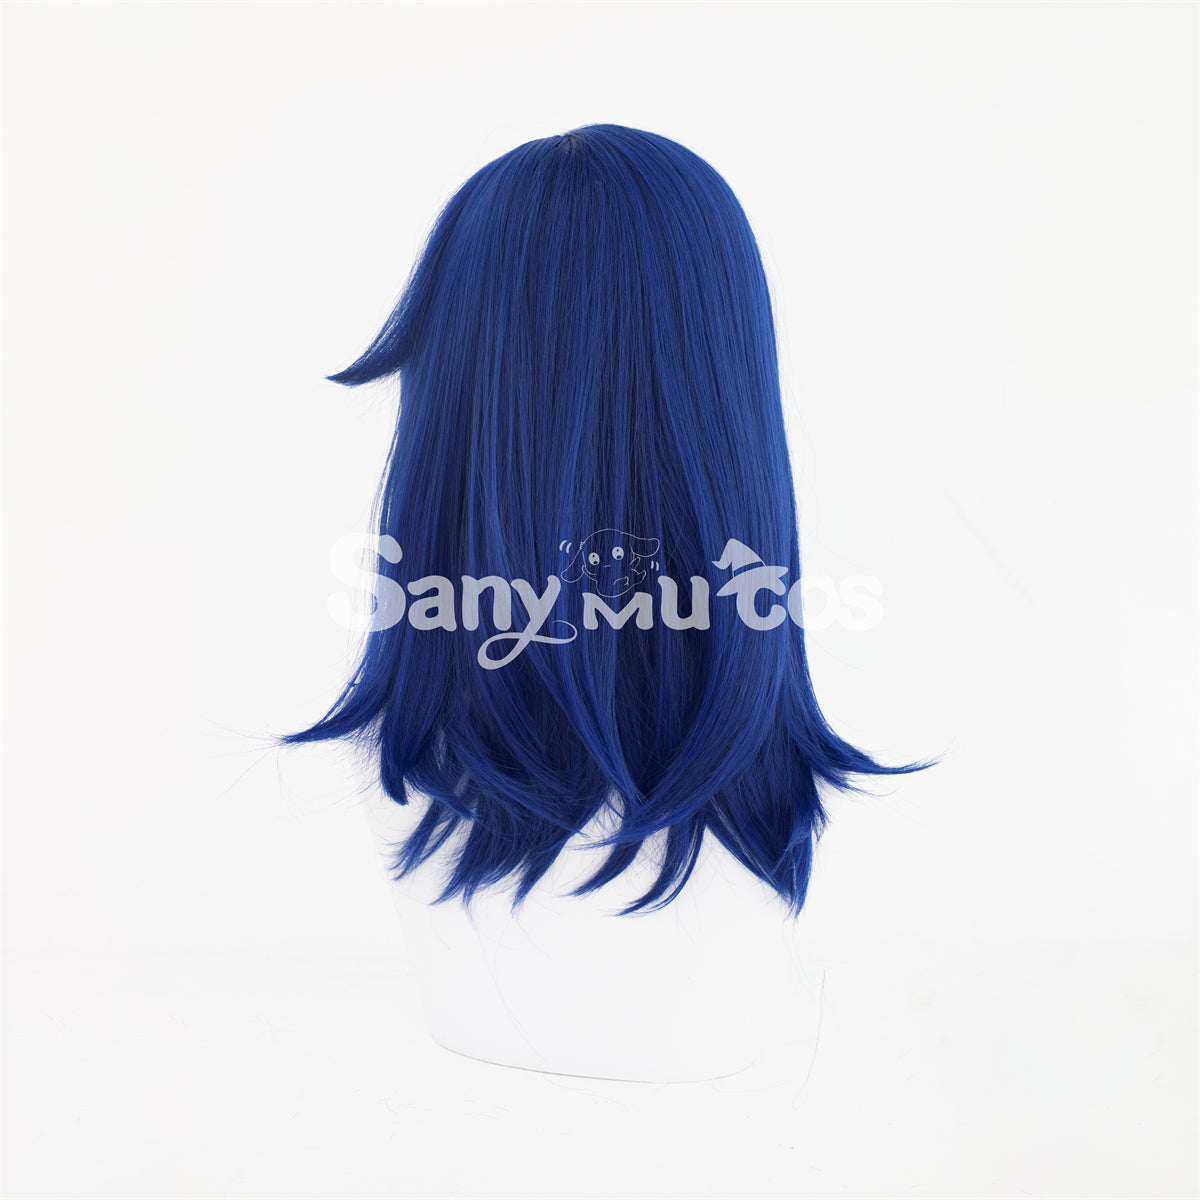 Game Path to Nowhere cosplay CRACHE cosplay wig